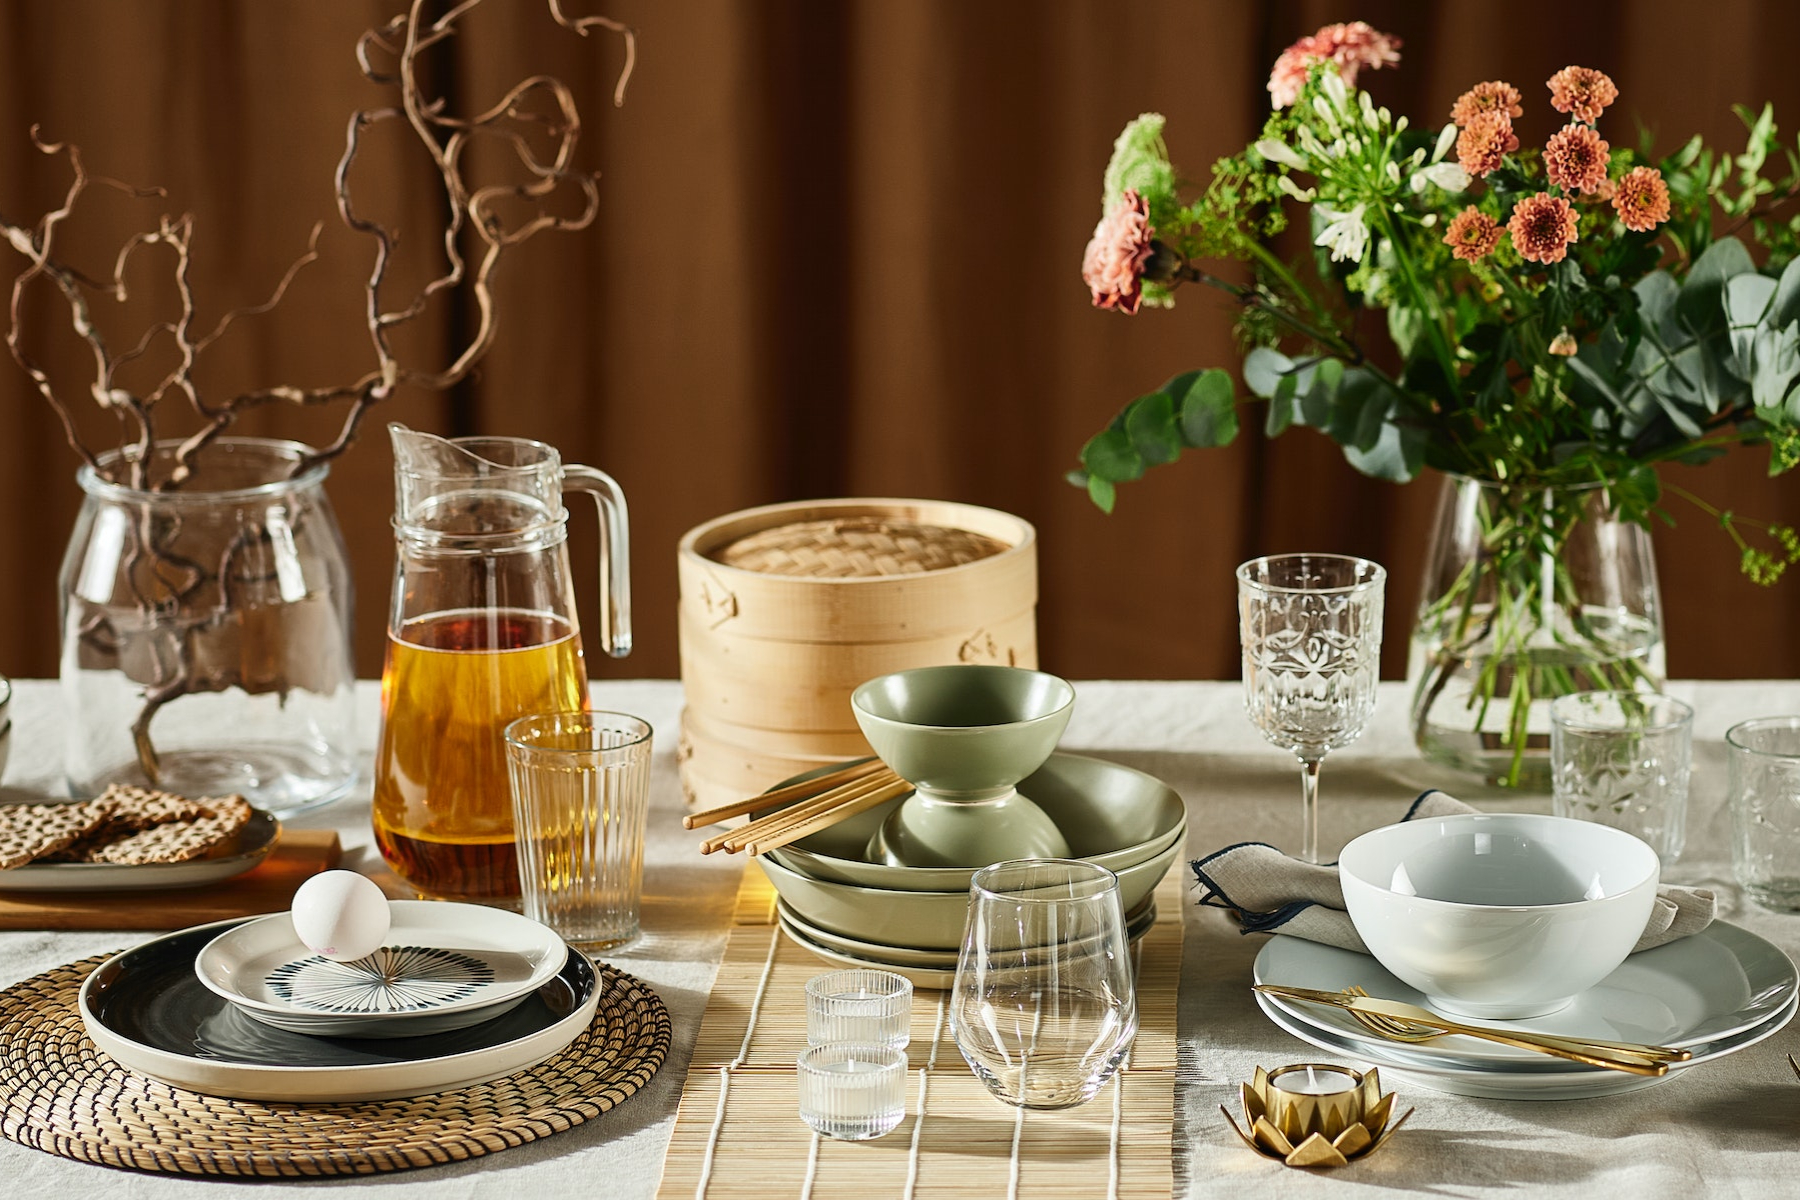 IKEA - 3 style ideas for dining table settings